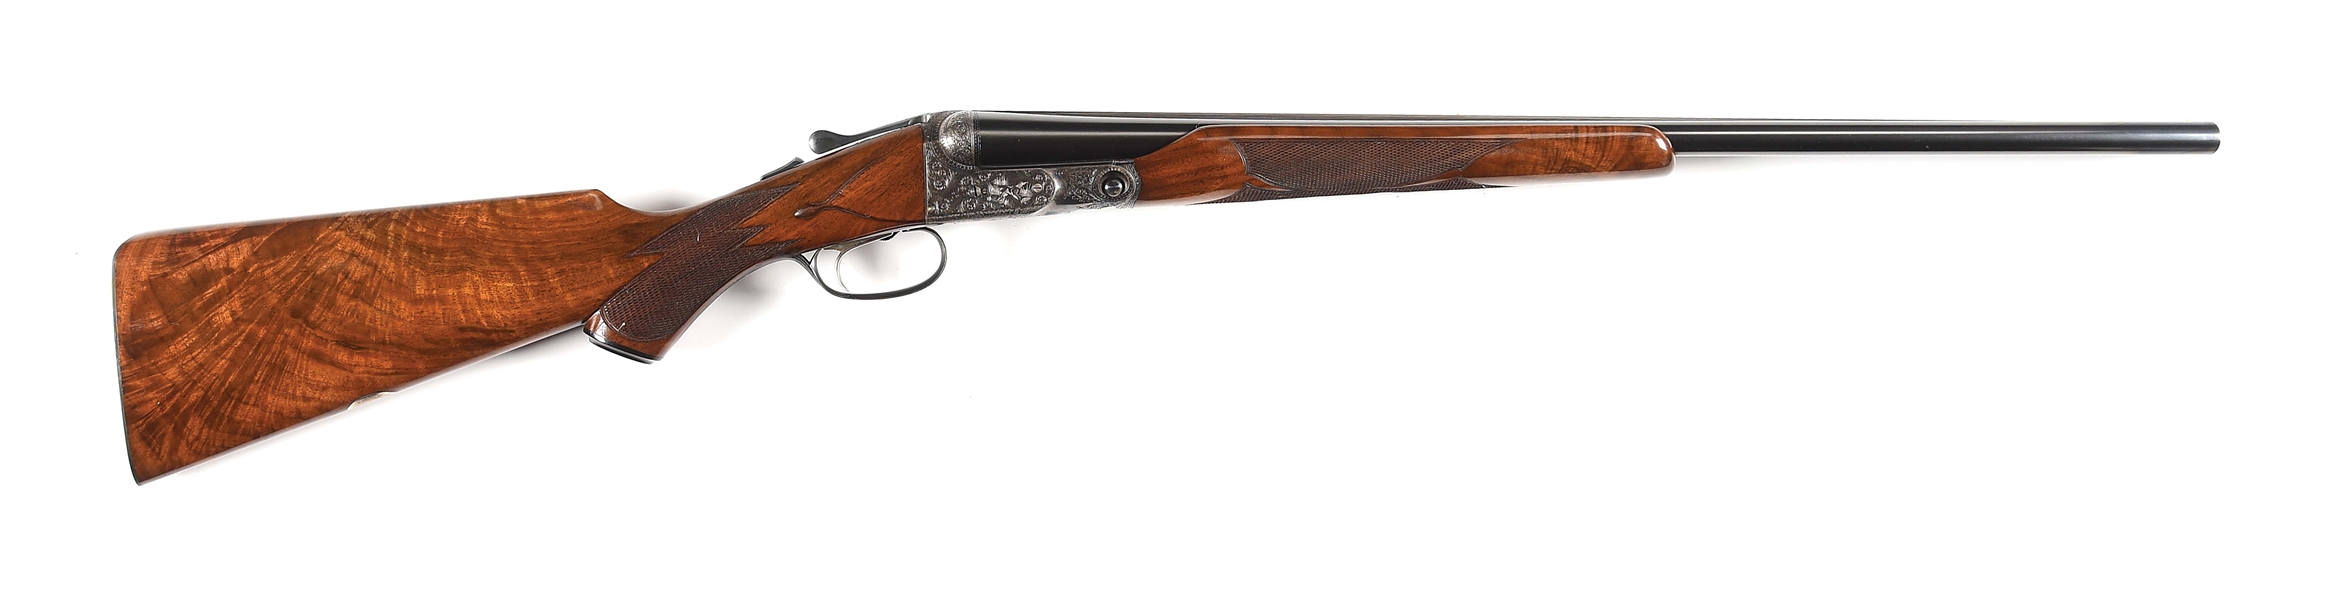 (C) PARKER BROS. DHE 16 BORE SIDE BY SIDE SHOTGUN WITH CASE.